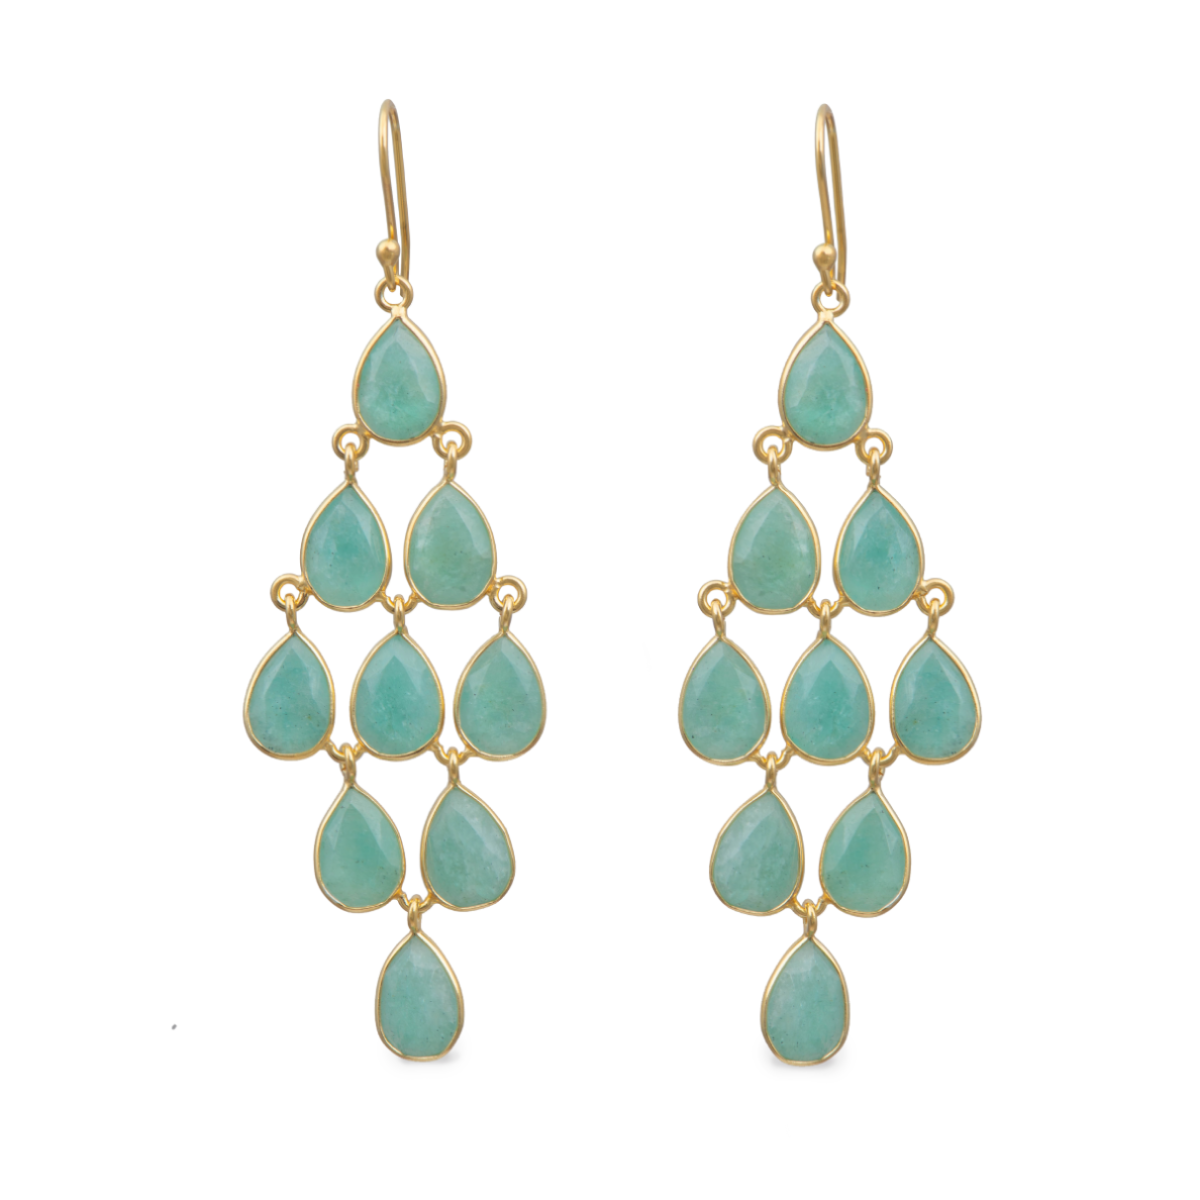 Gold Plated Sterling Silver Chandelier Earrings with Natural Gemstones  - Amazonite